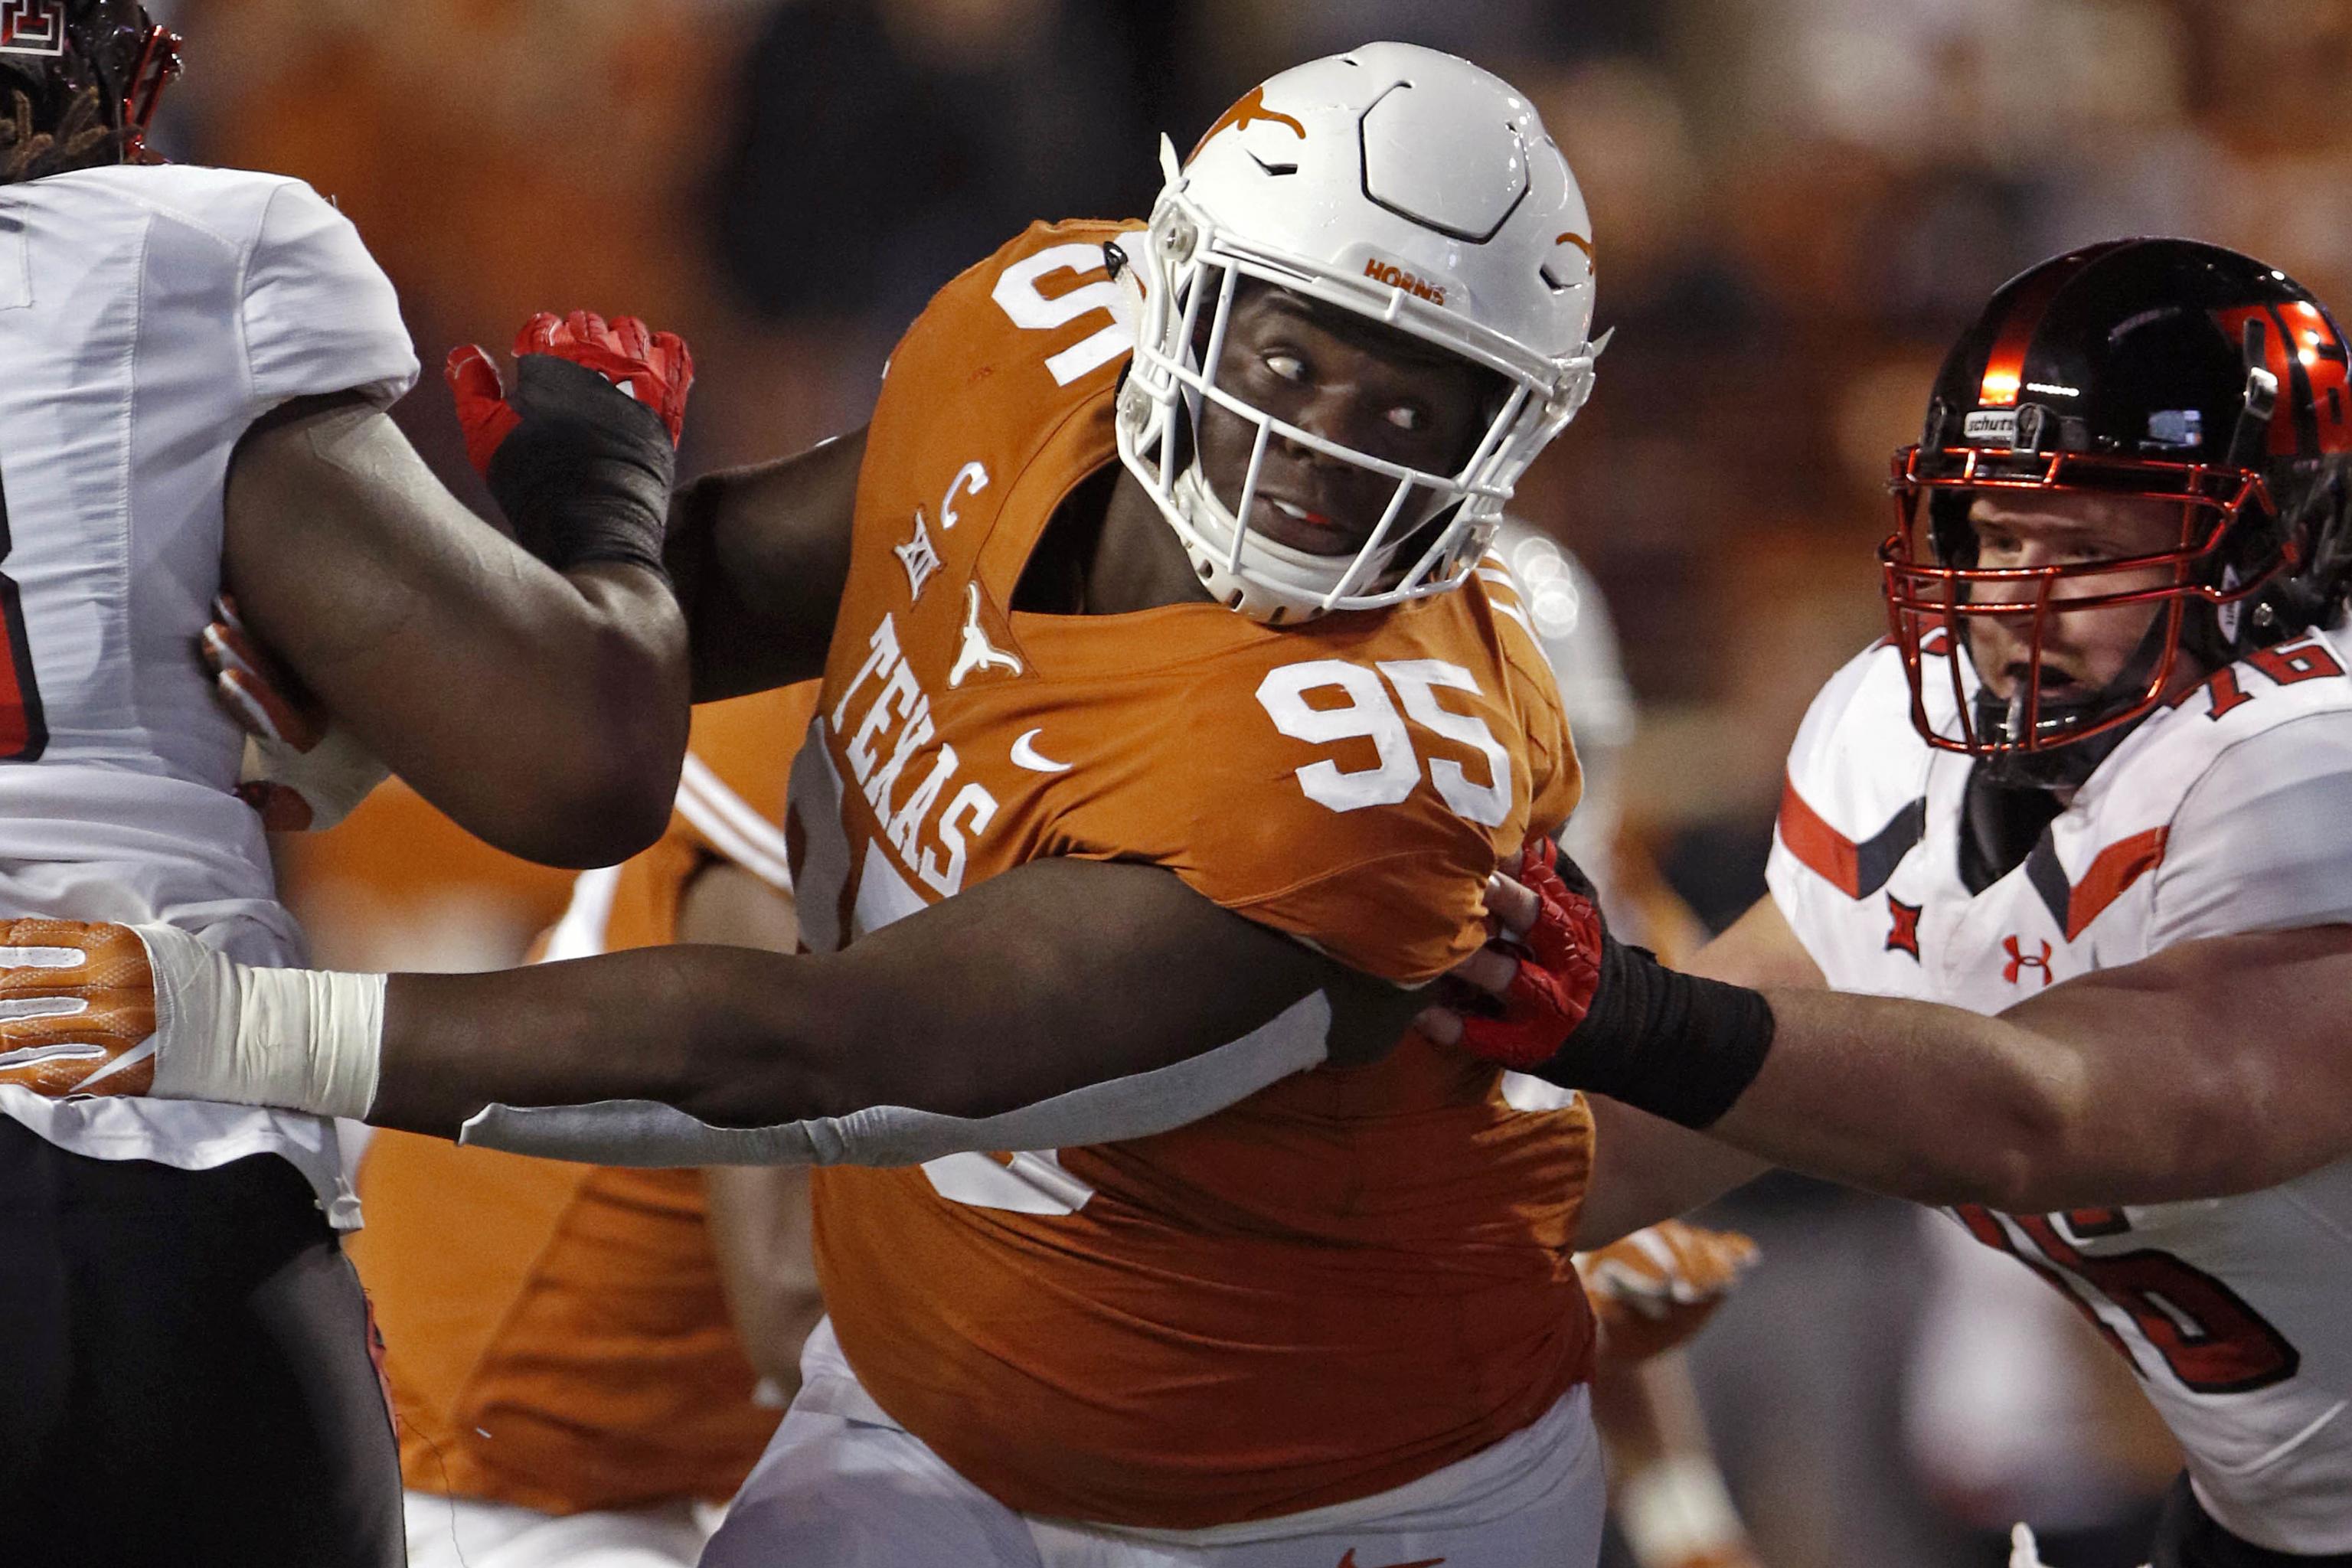 Poona Ford to Texas: Longhorns Land 4-Star DT Prospect